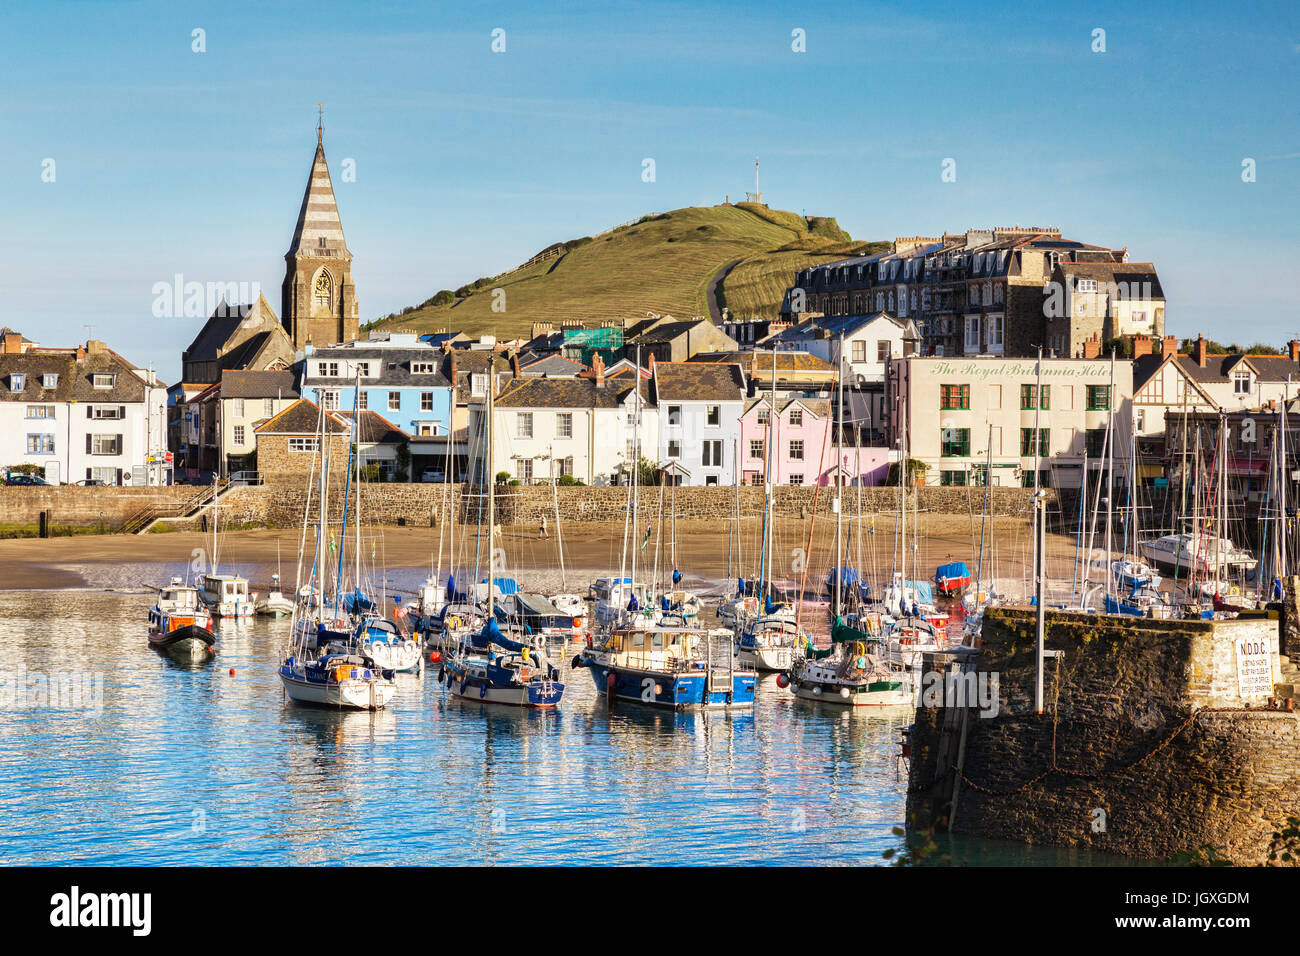 14 June 2017: Ilfracombe, North Devon, England, UK - The harbour on a bright sunny morning in summer, with Capstone Hill in the background. Stock Photo